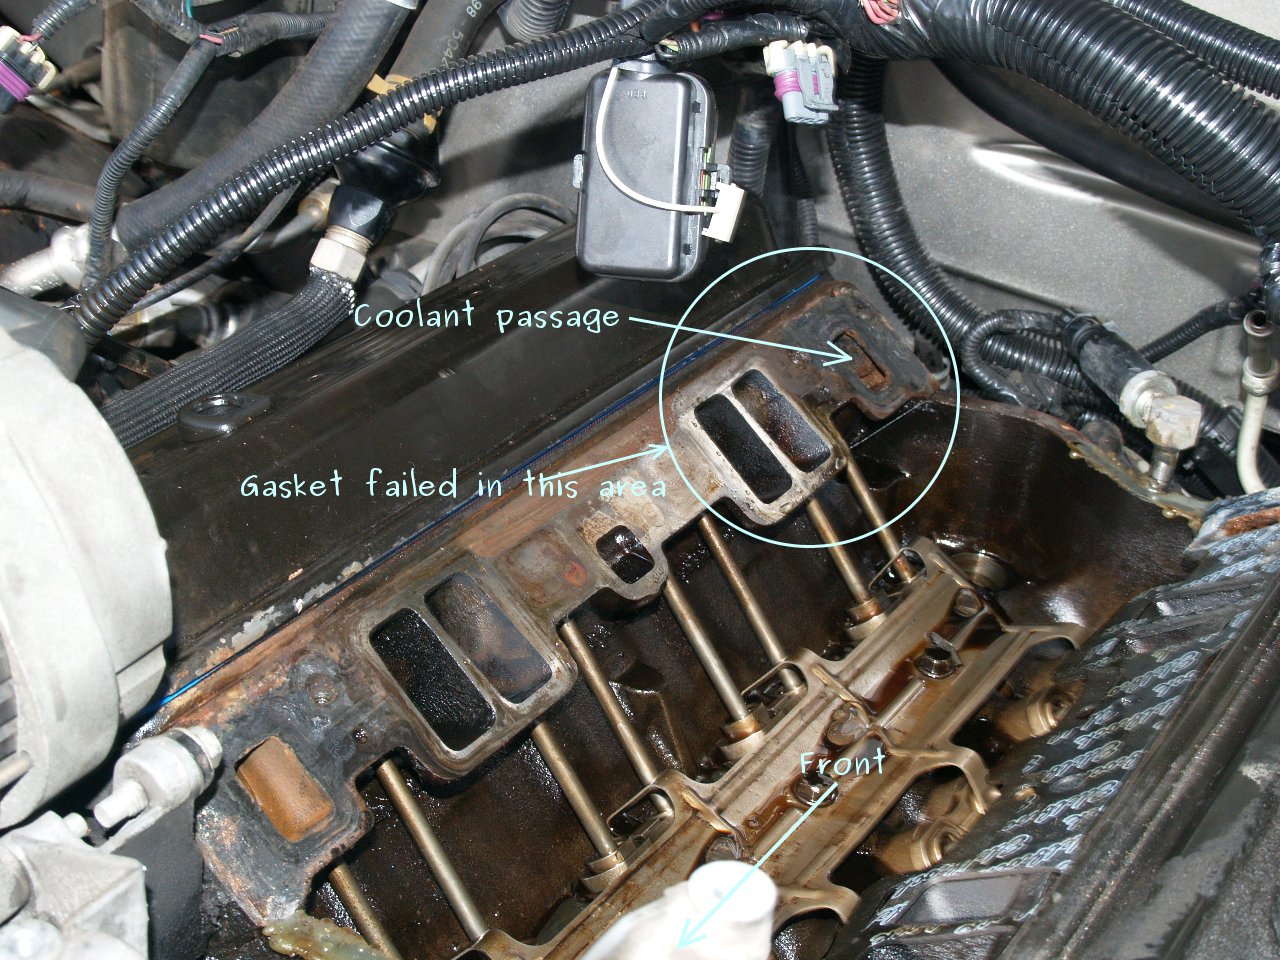 See B2105 in engine